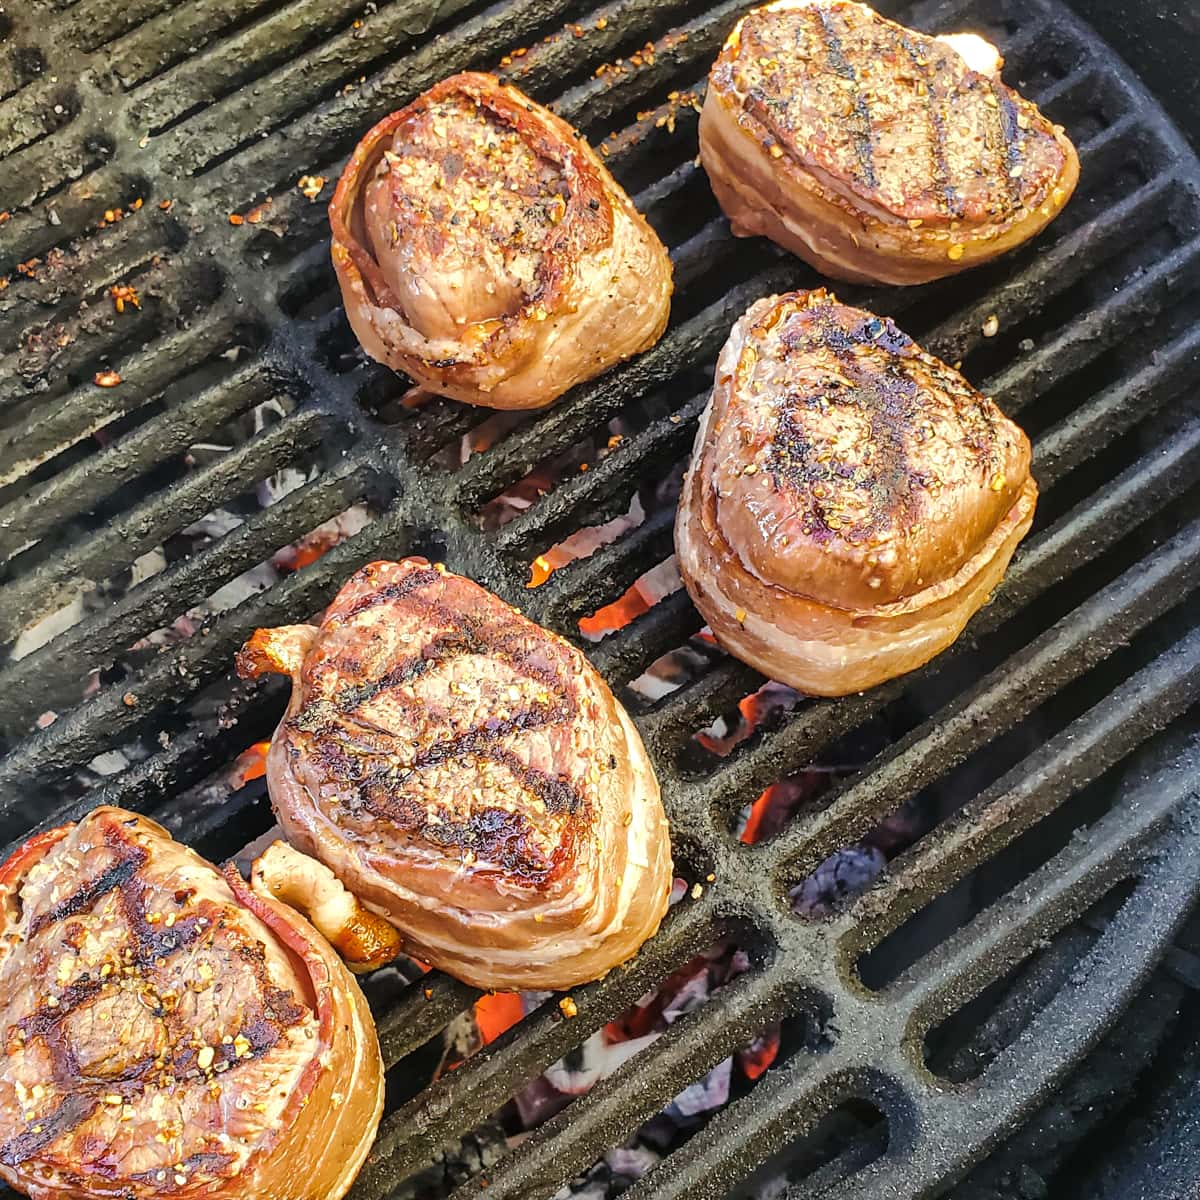 Bacon wrapped filet mignon on a Big Green Egg grill.